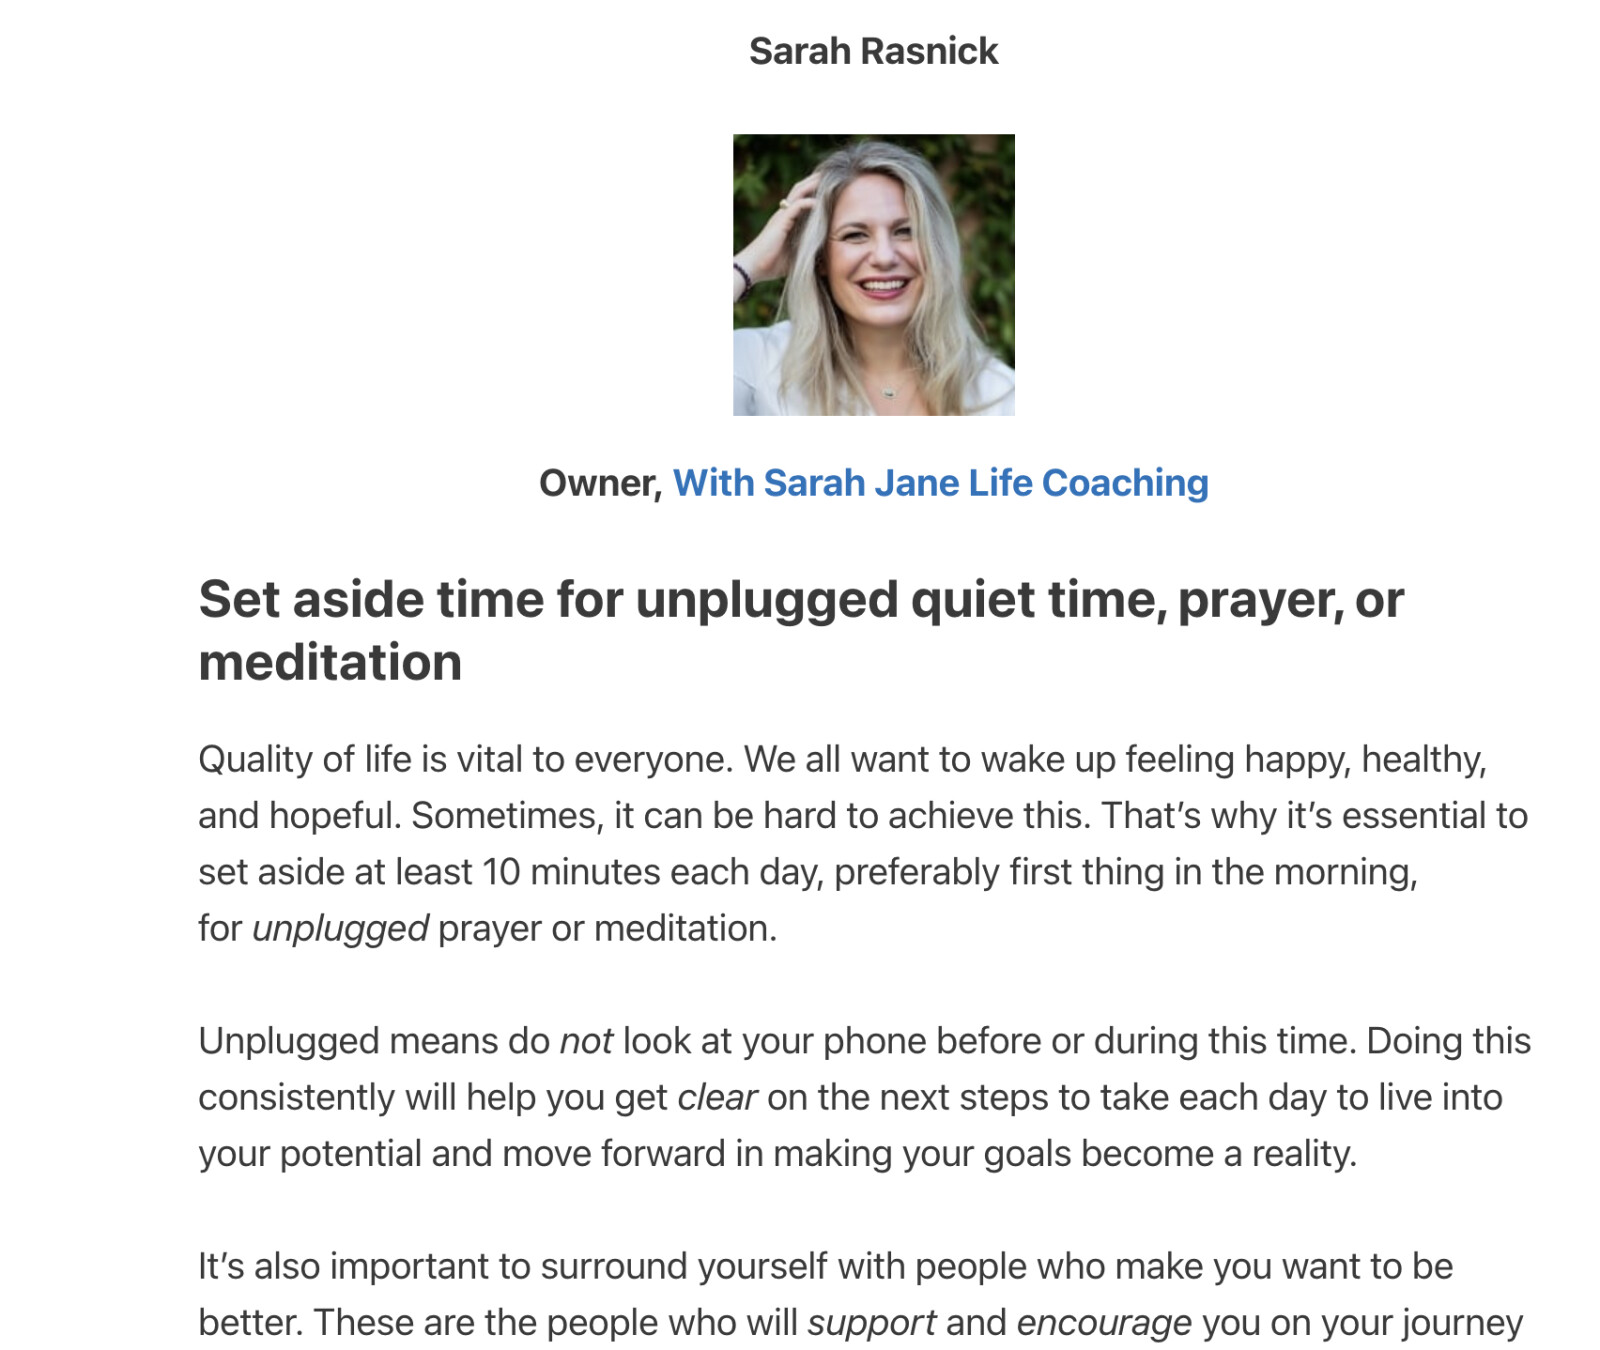 Sarah Got Quoted in an Article About How to Improve Your Quality of Life! Check it Out! 